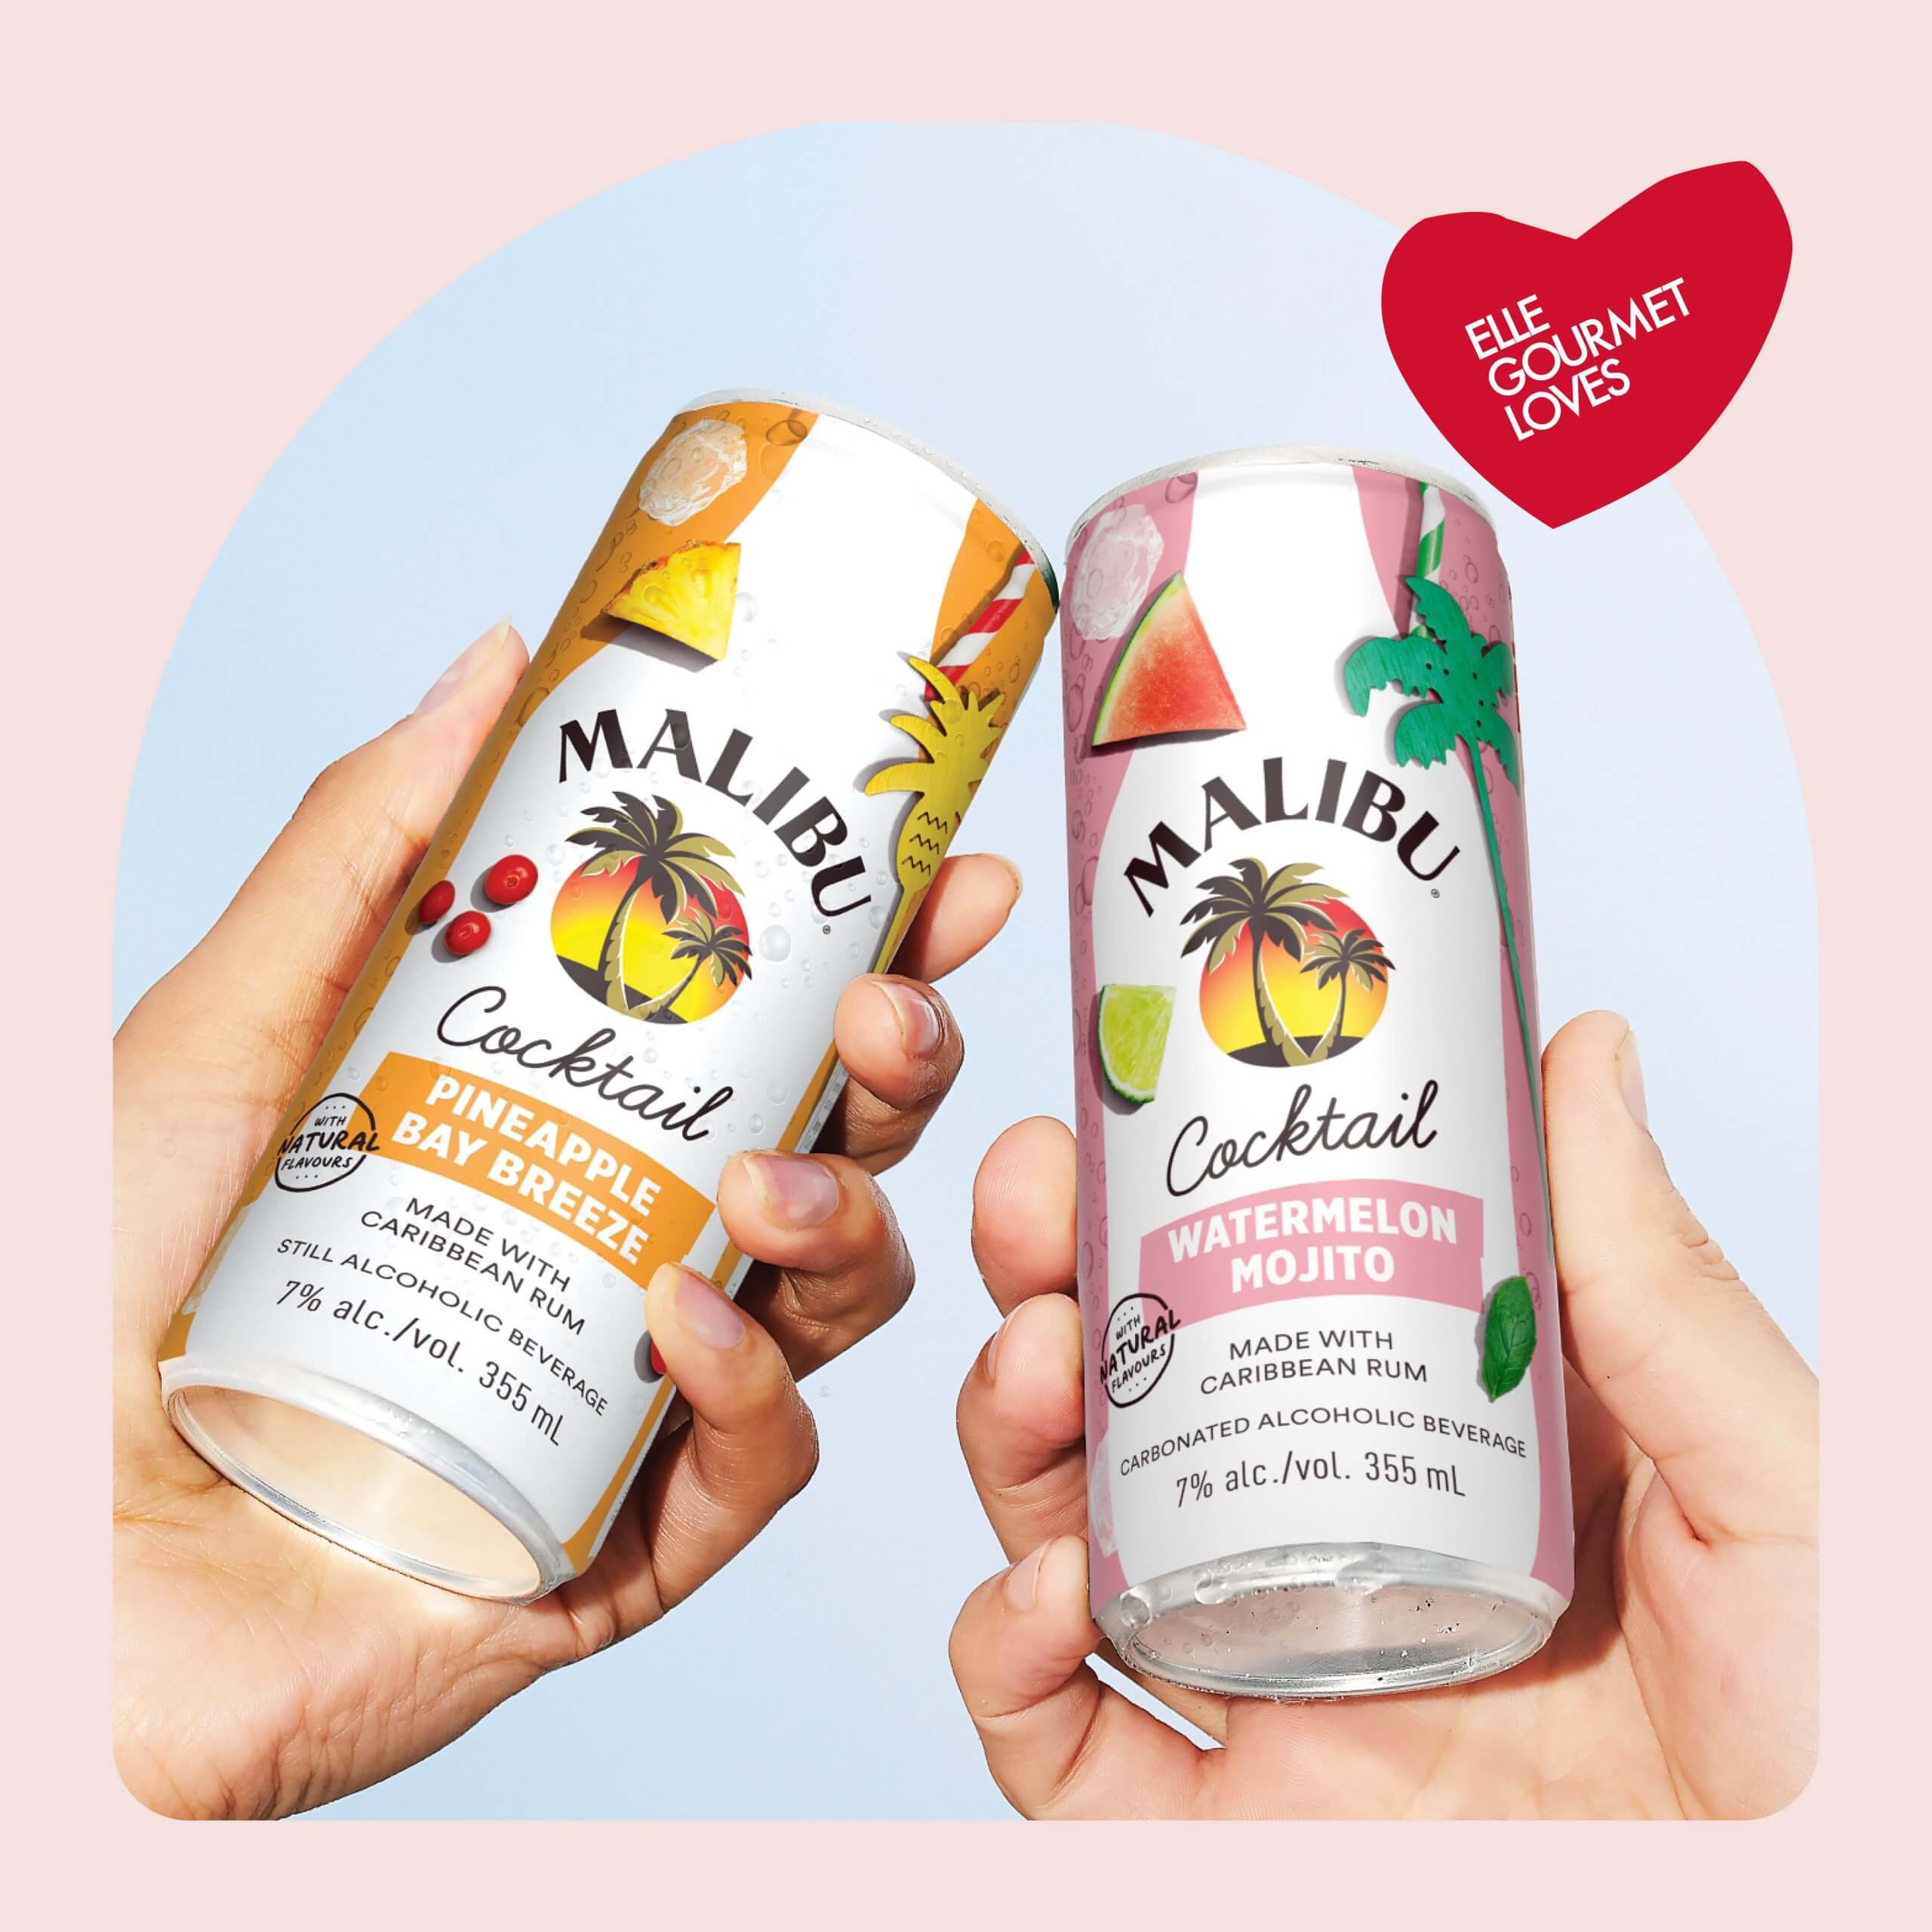 Two hands holding canned cocktails against the sky, in a light pink frame with a heart bearing the words "ELLE Gourmet Loves"